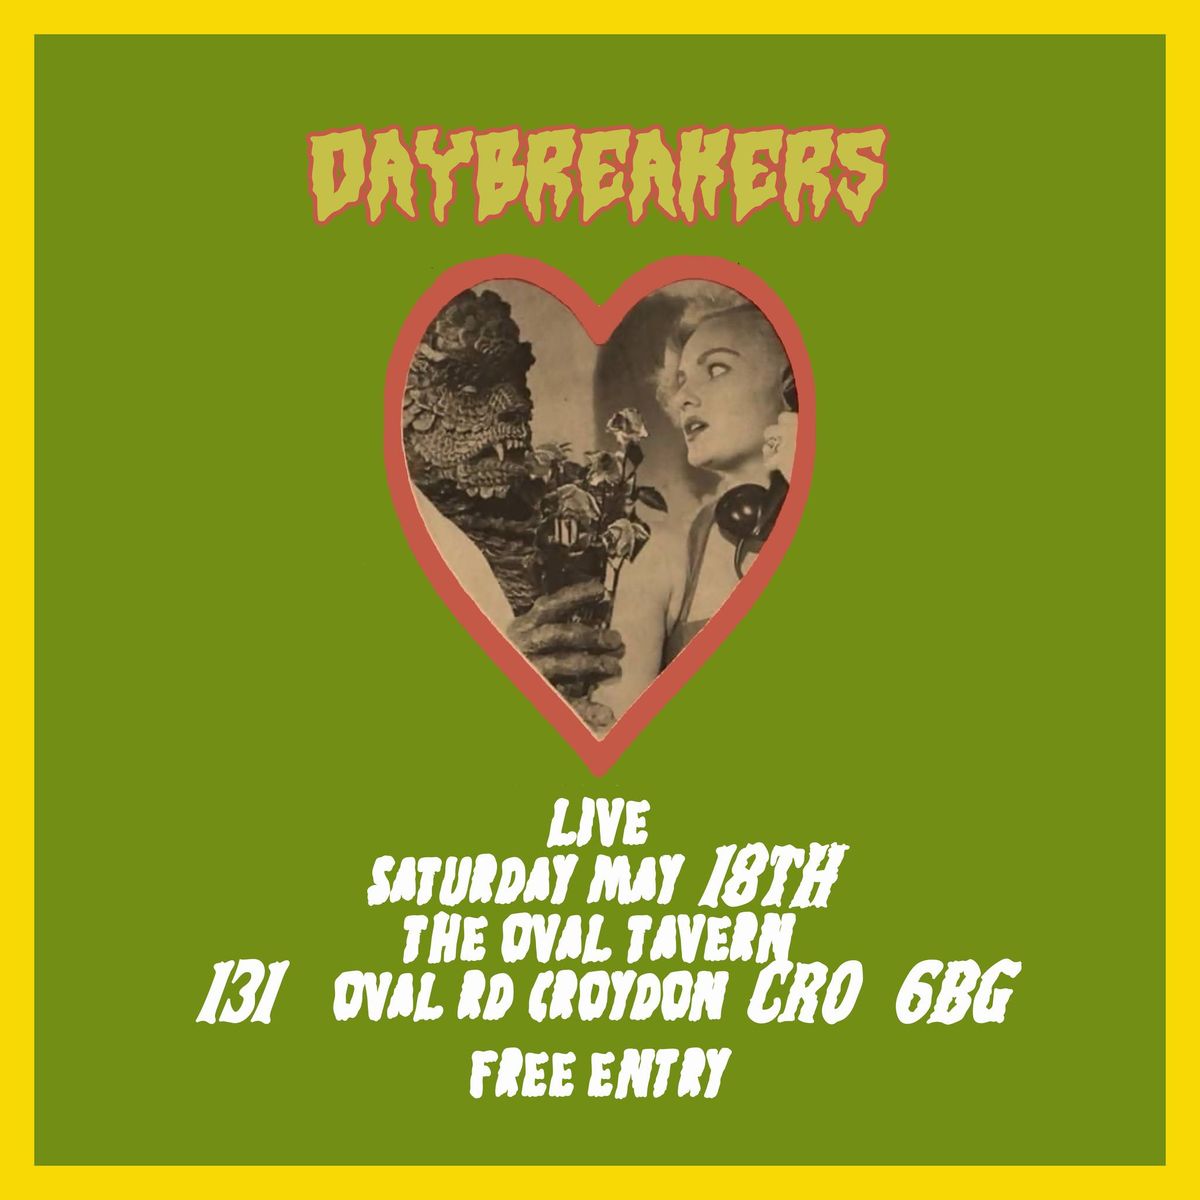 The Daybreakers 'Pub Crawl'  Live at The Oval Tavern Croydon